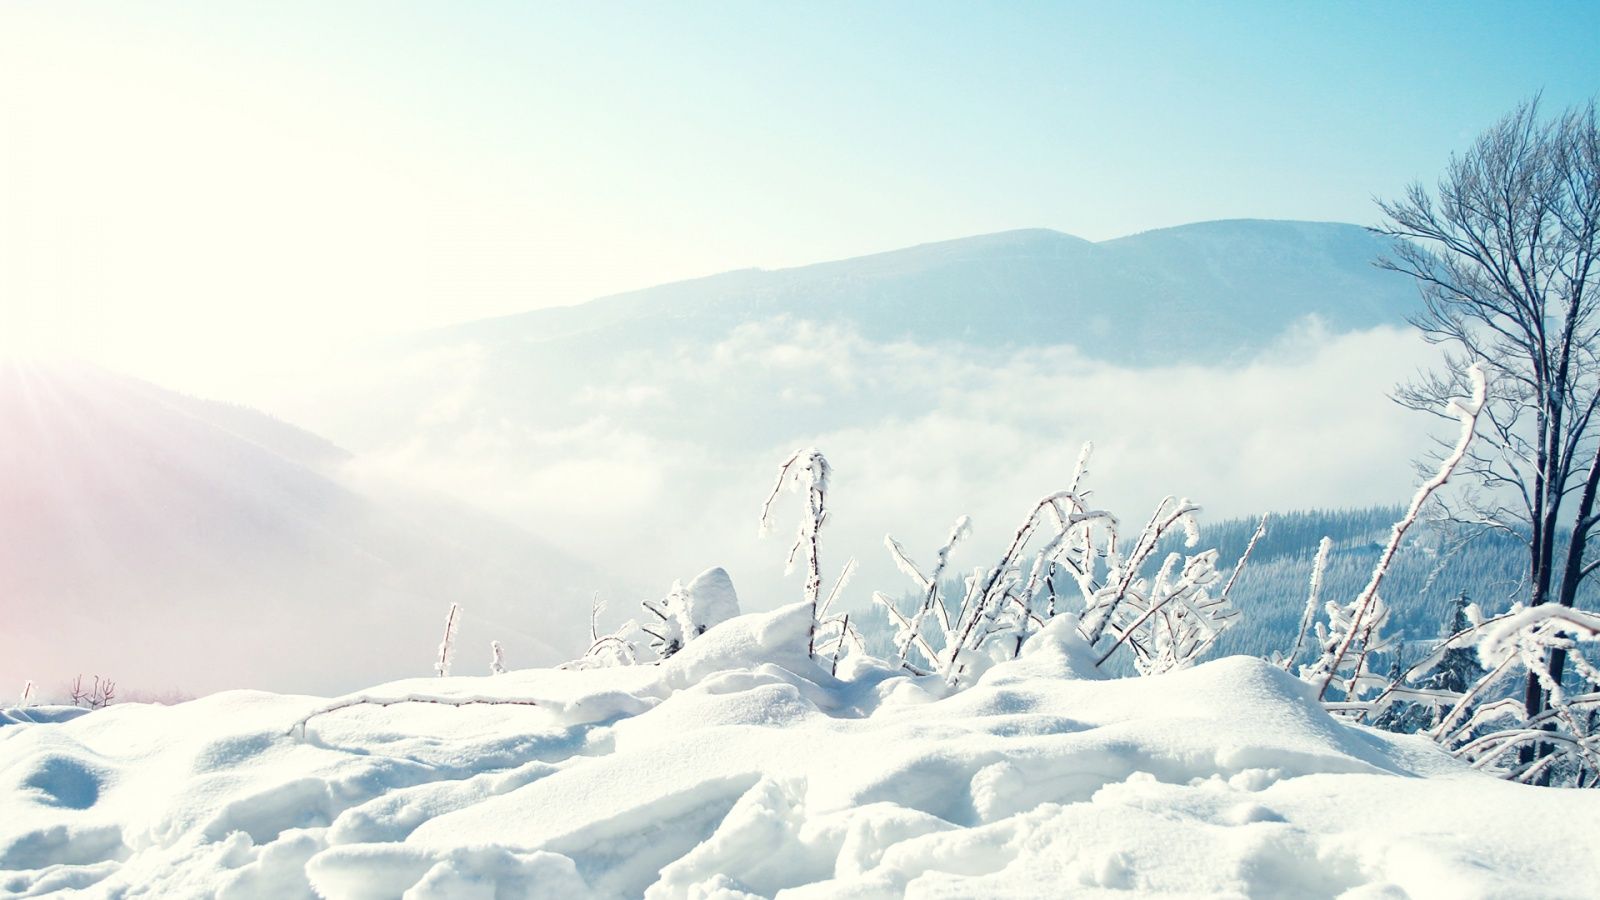 Snow Winter Mountains Wallpaper in jpg format for free download